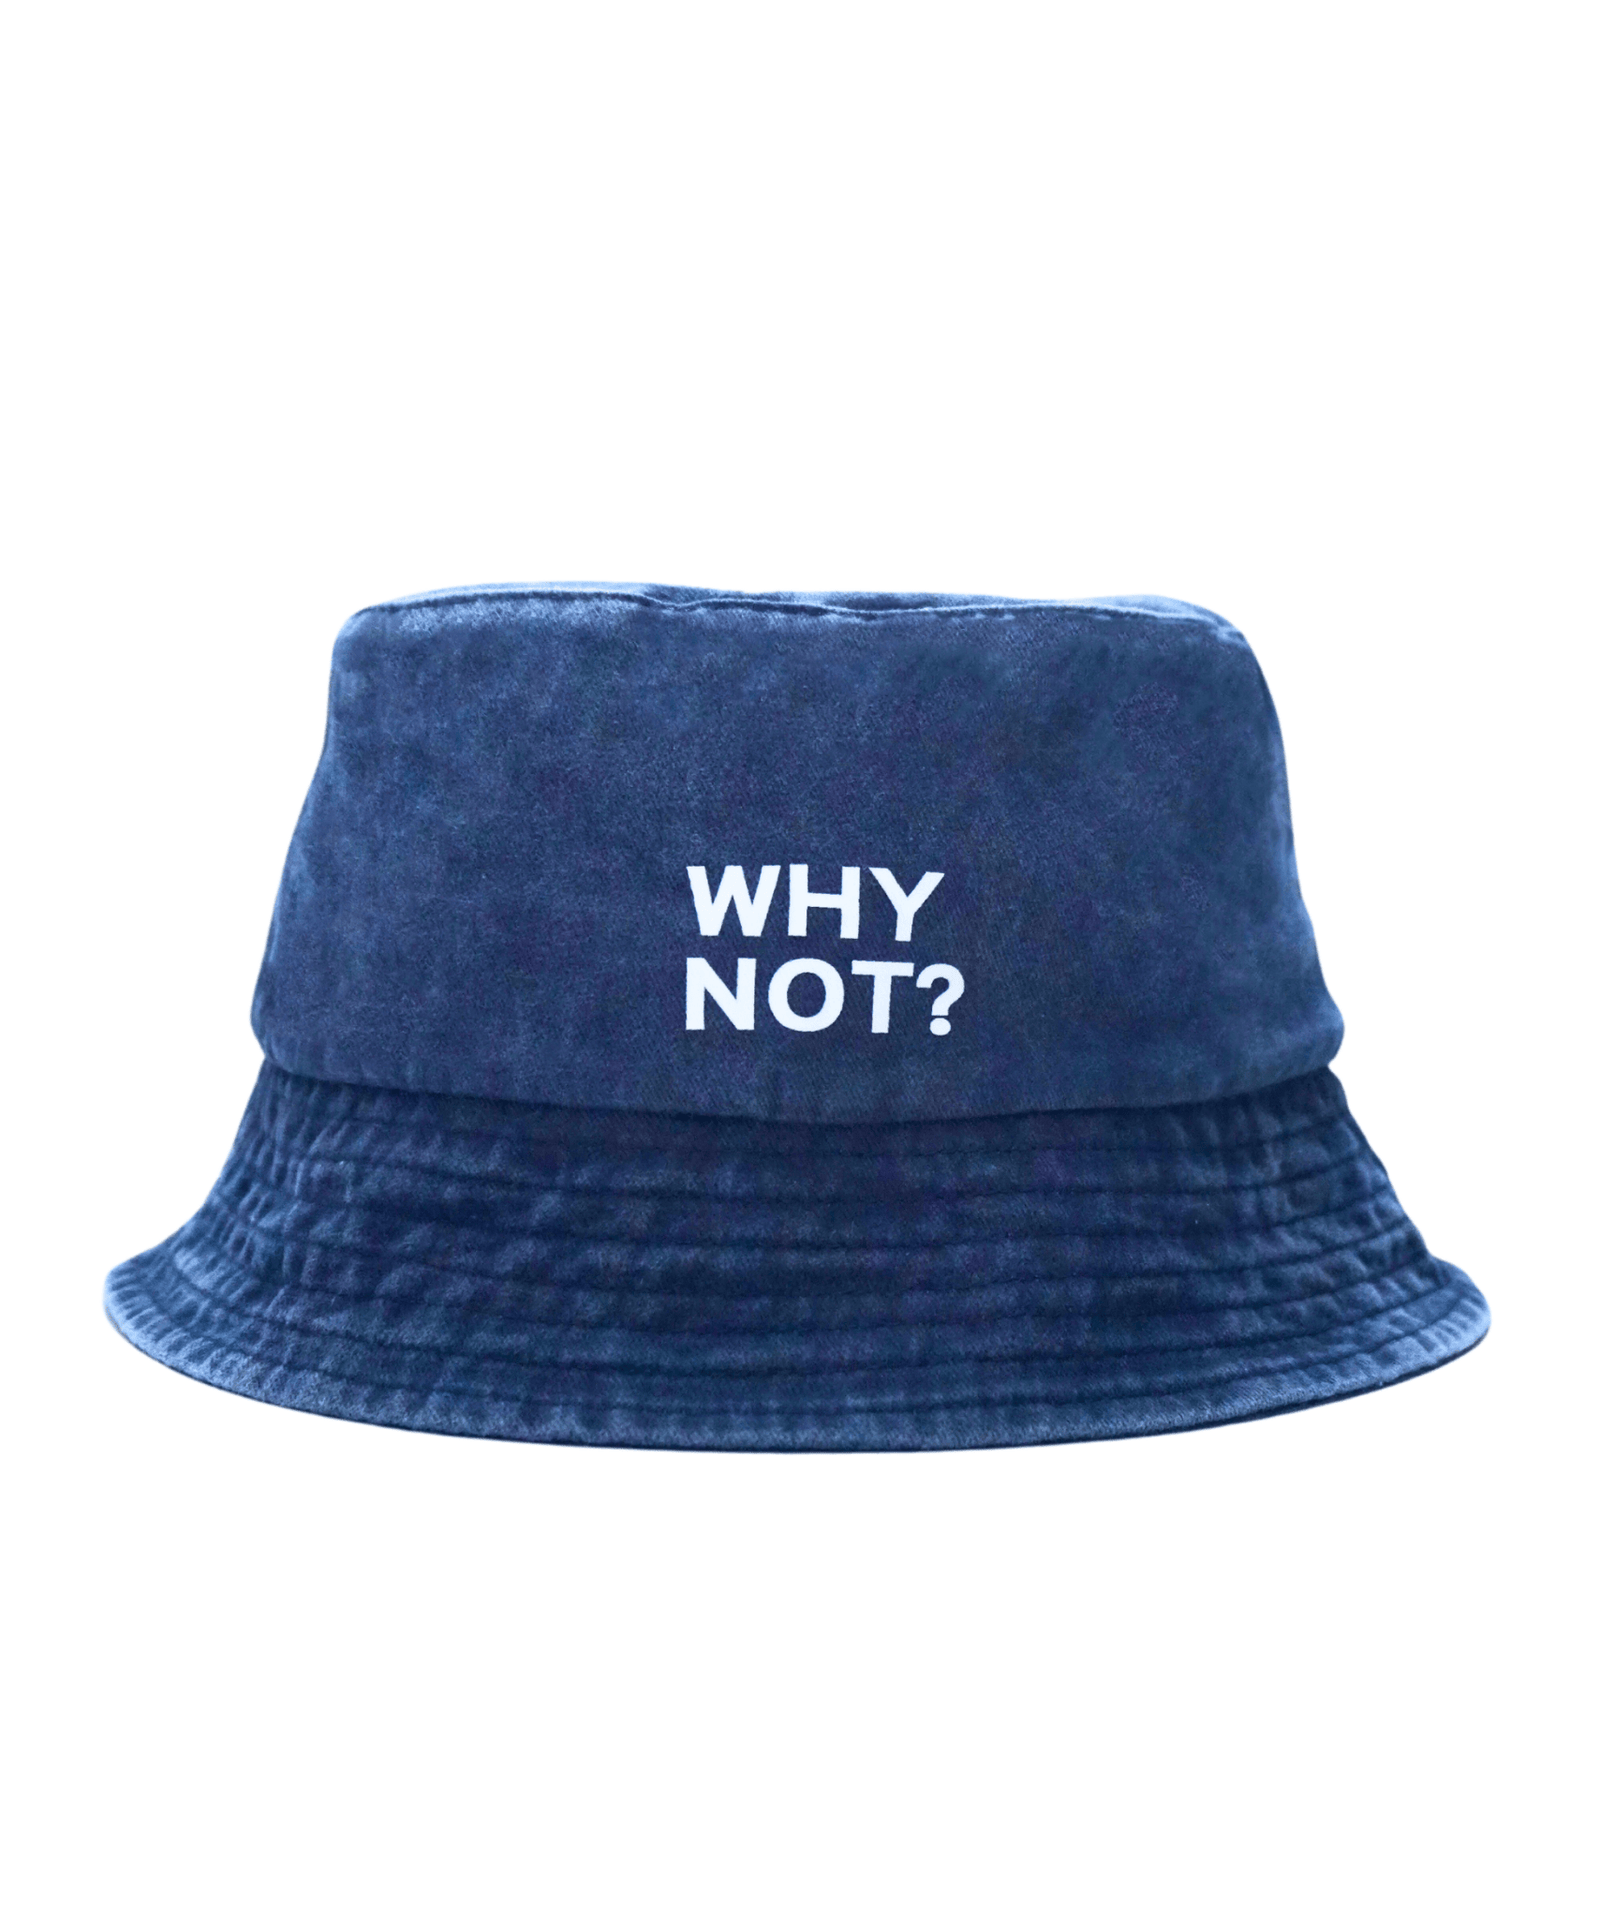 Why not? Bucket Hat - OBLIVIOUS?